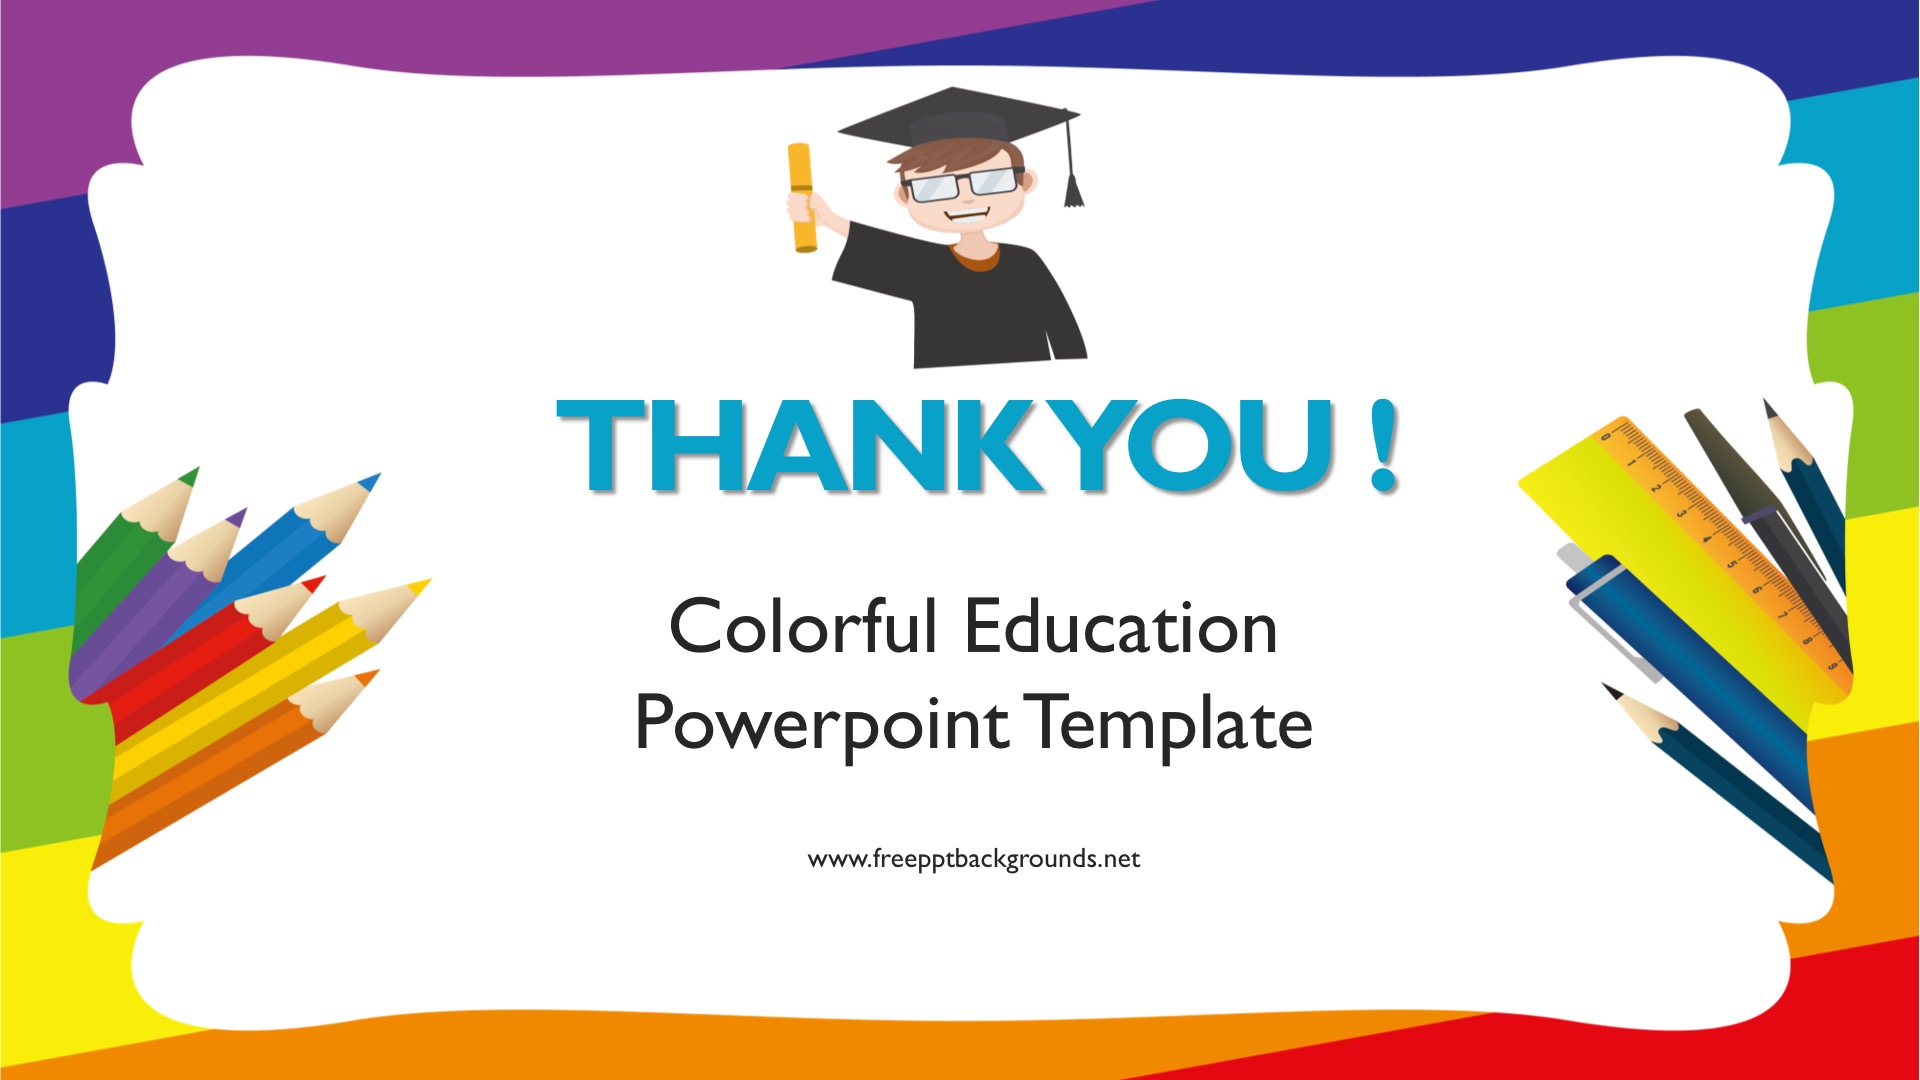 colorful-education-powerpoint-templates-education-free-ppt